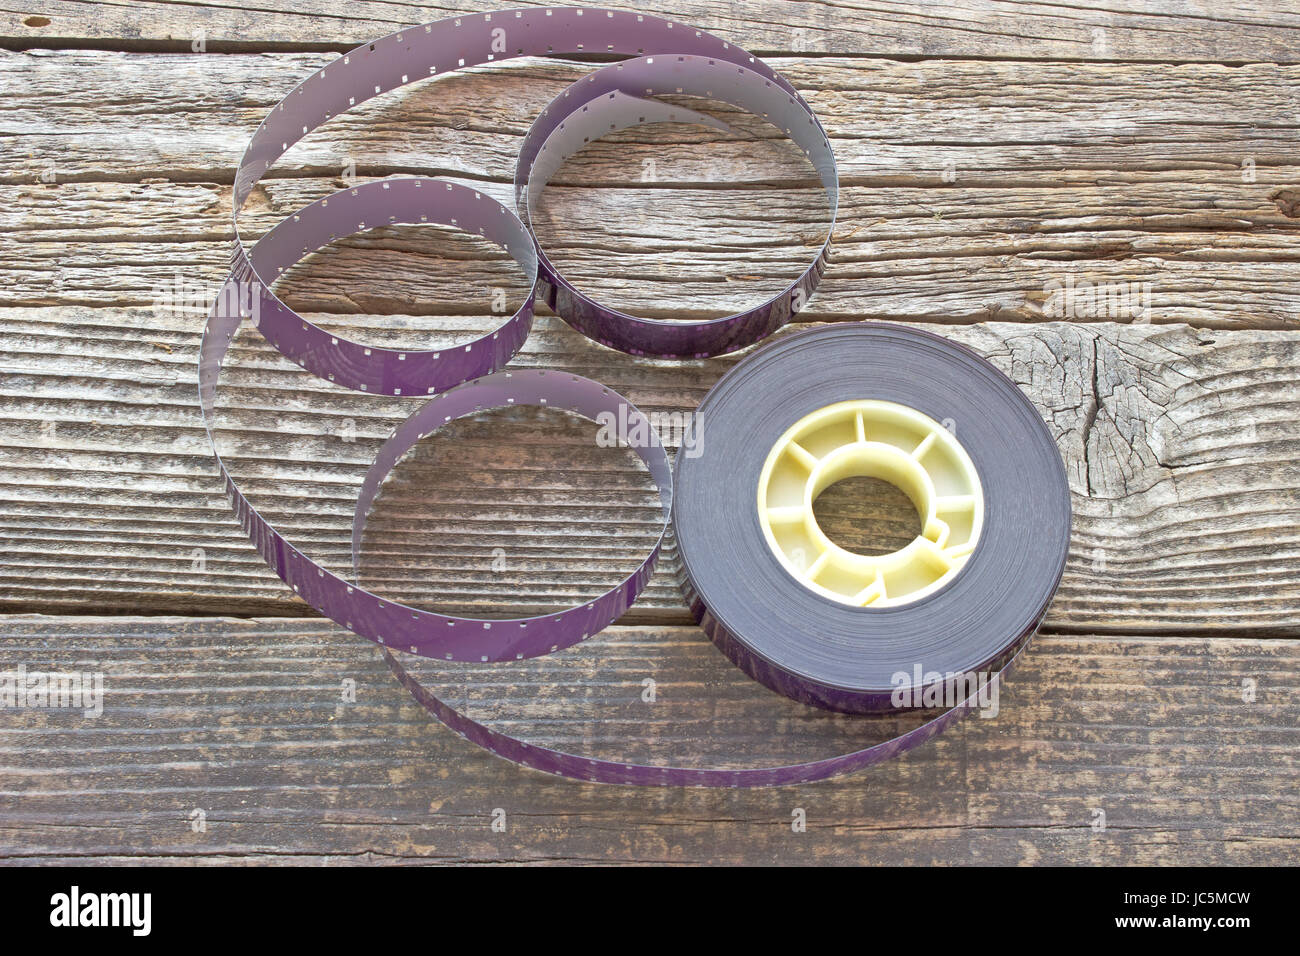 16 mm film reel on wooden background Stock Photo